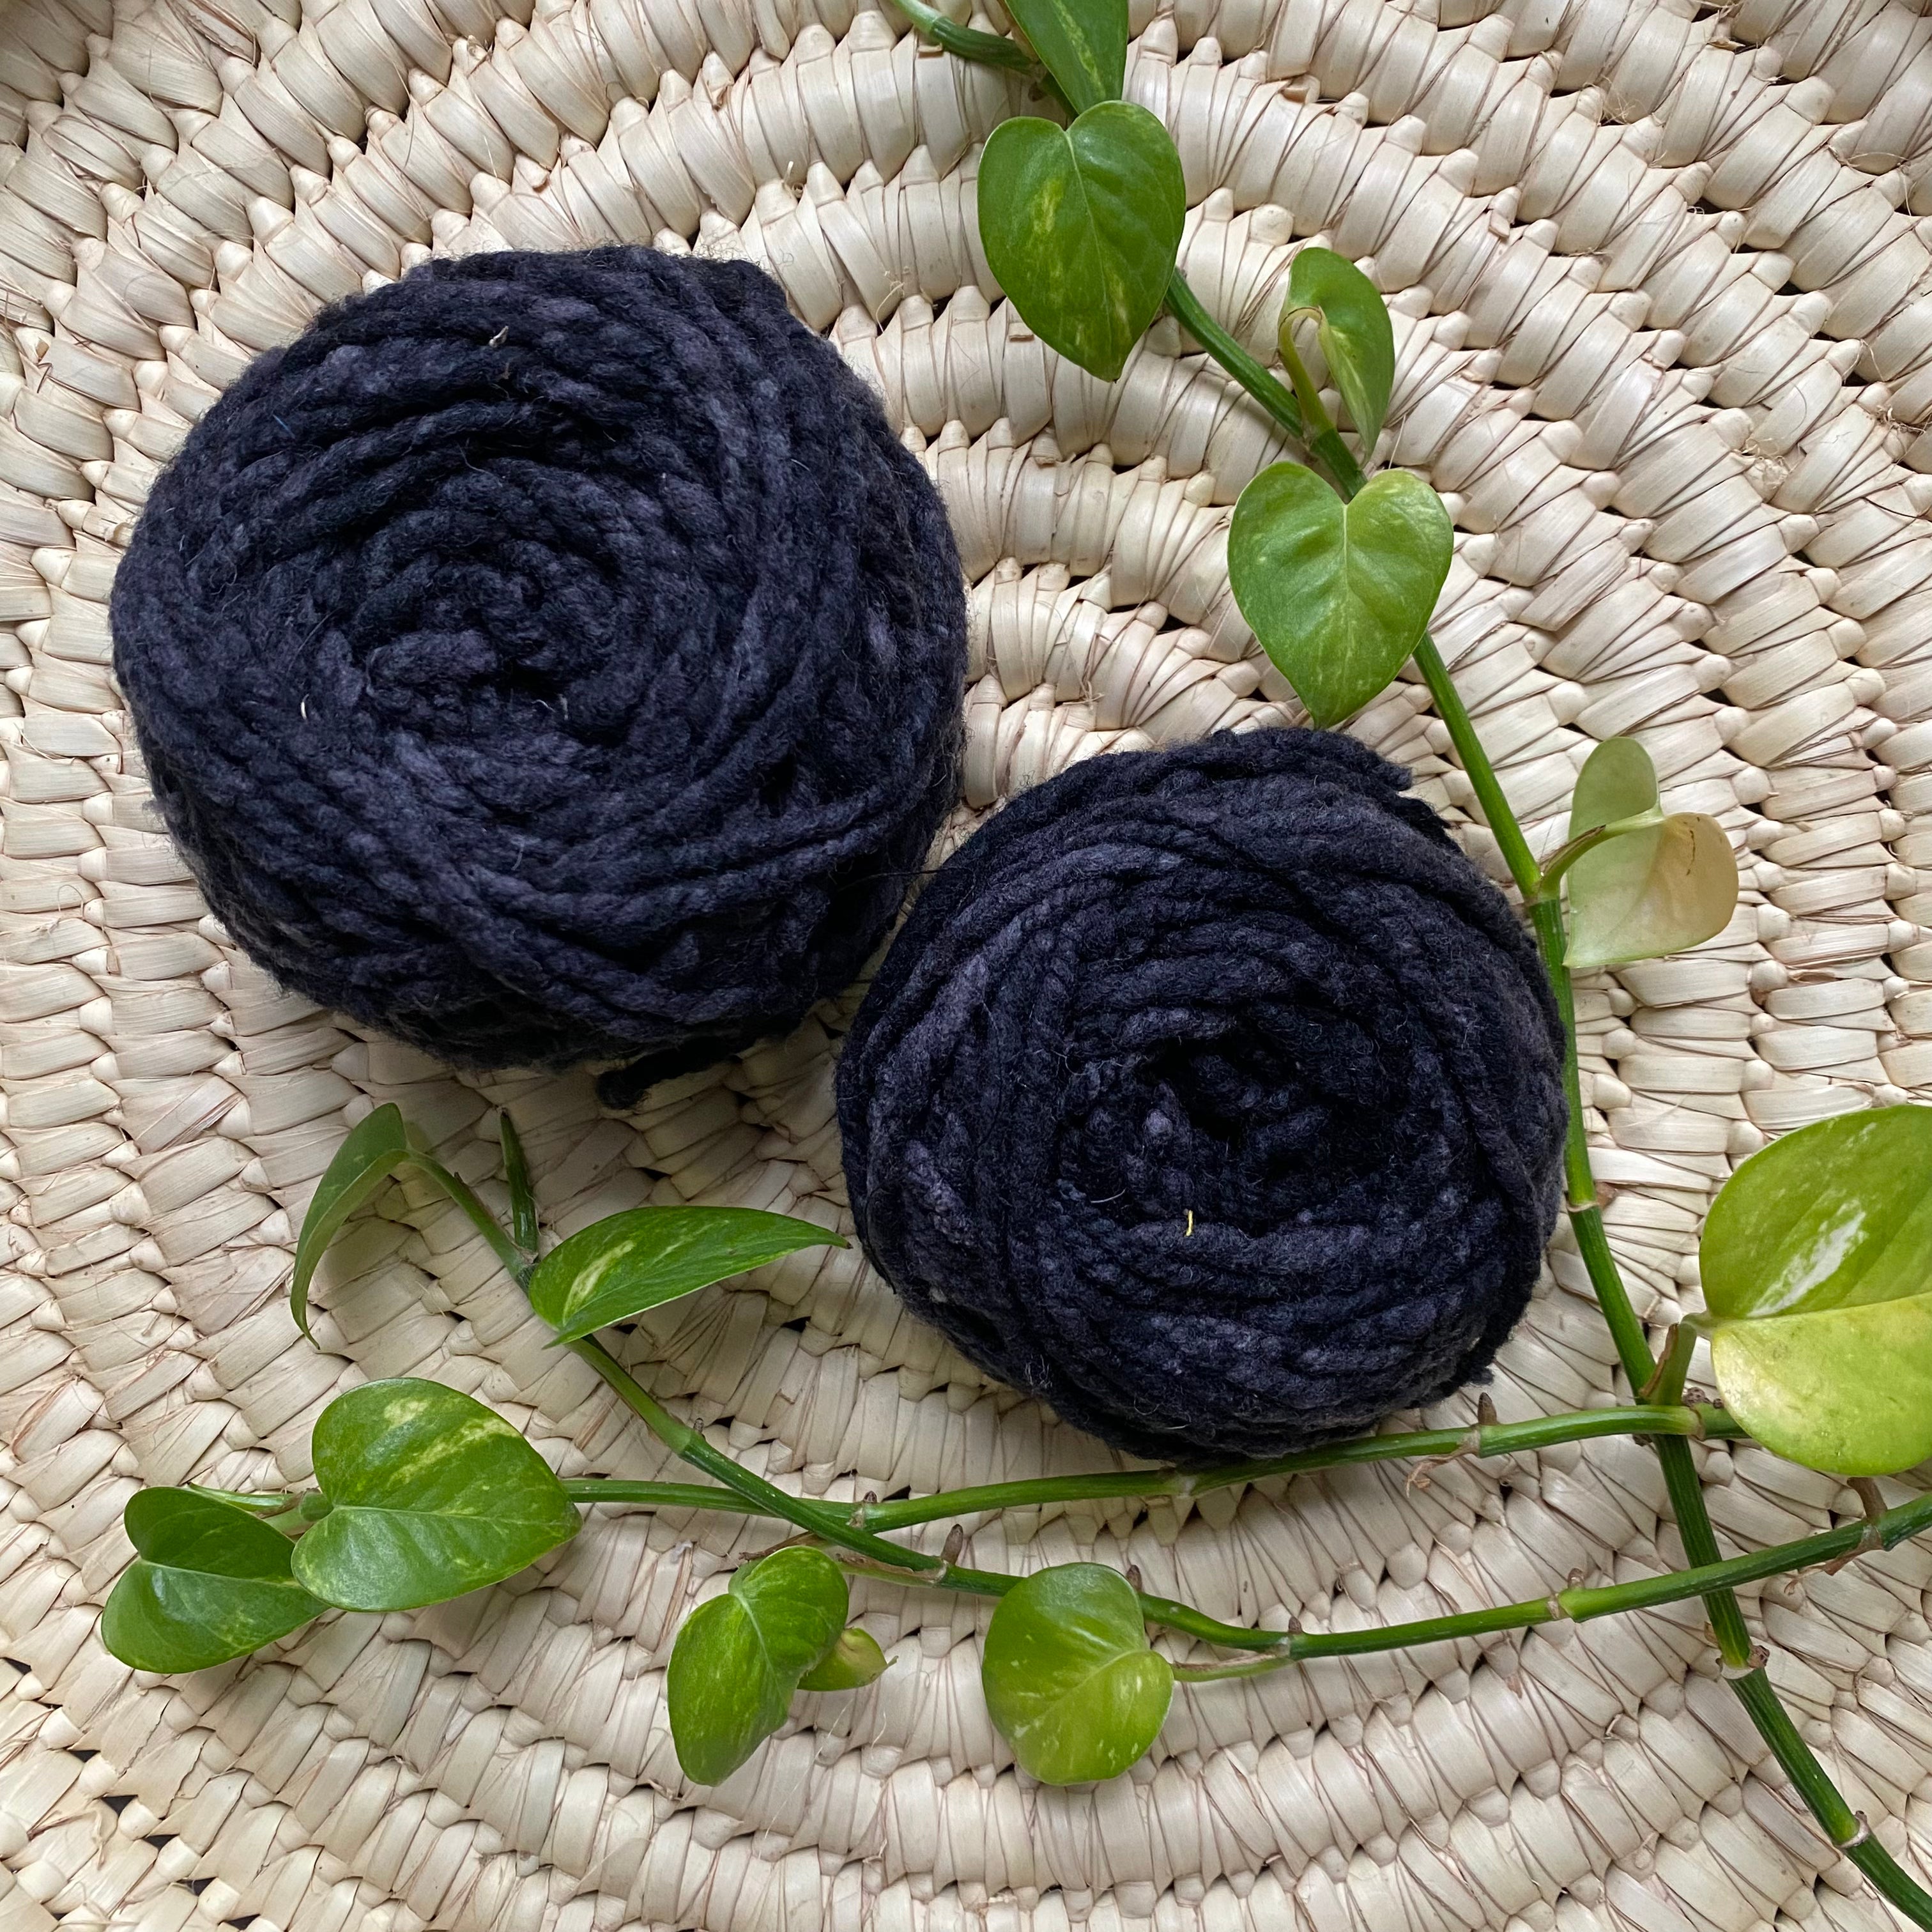 Th display of charcoal colored yarn